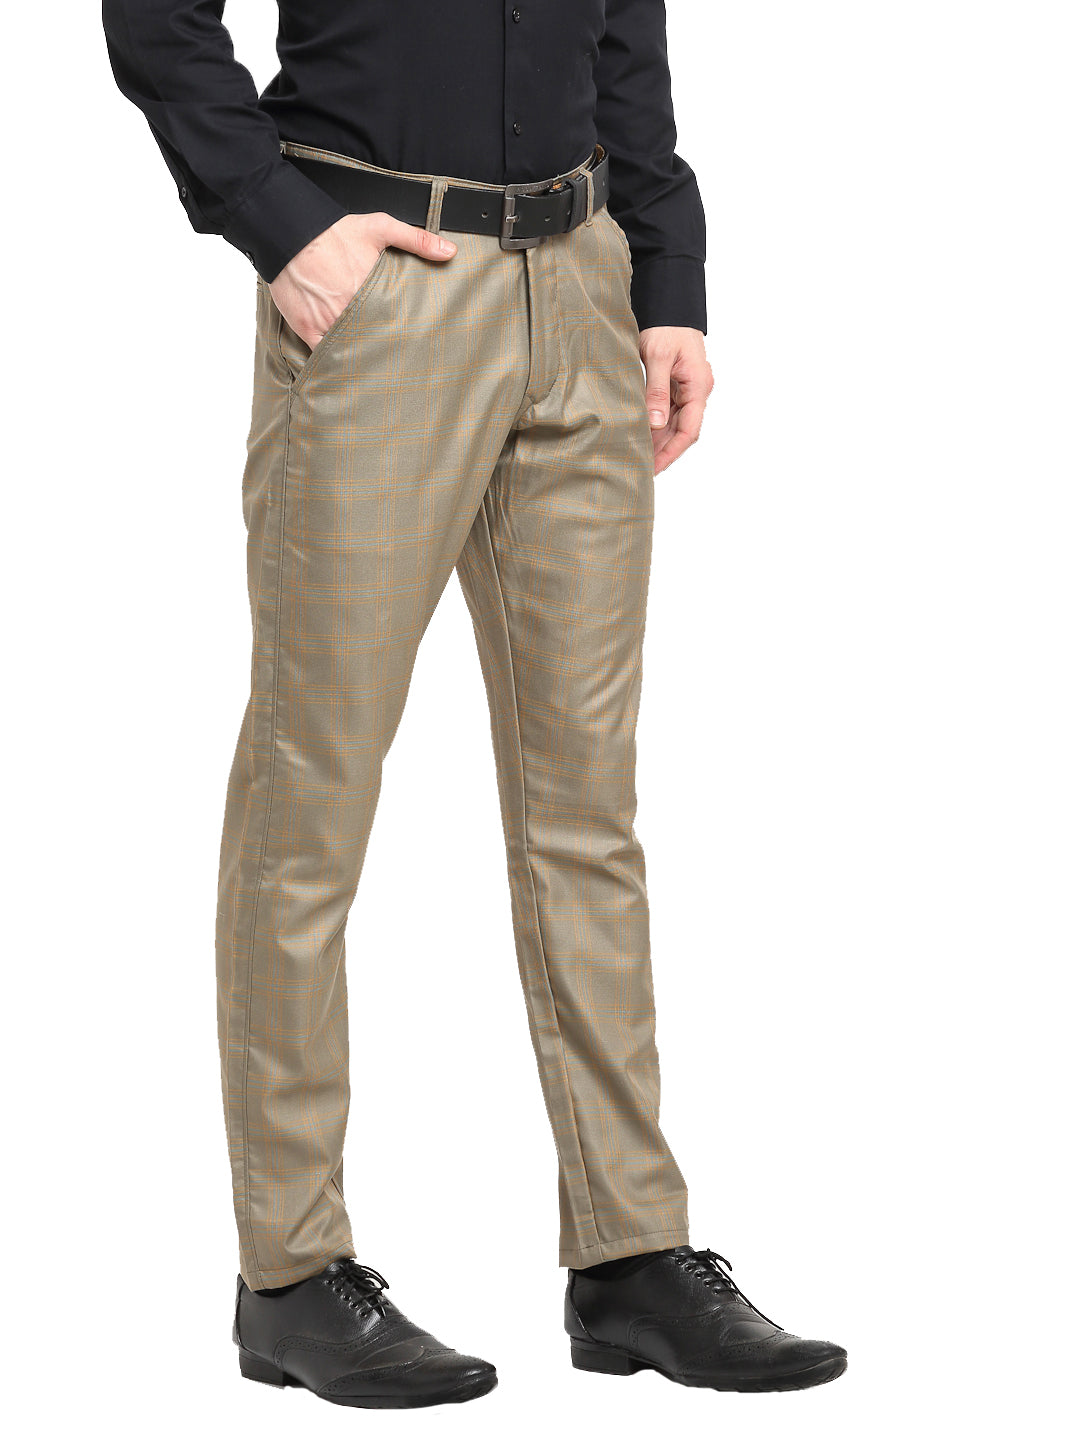 Jainish Men's Brown Cotton Checked Formal Trousers